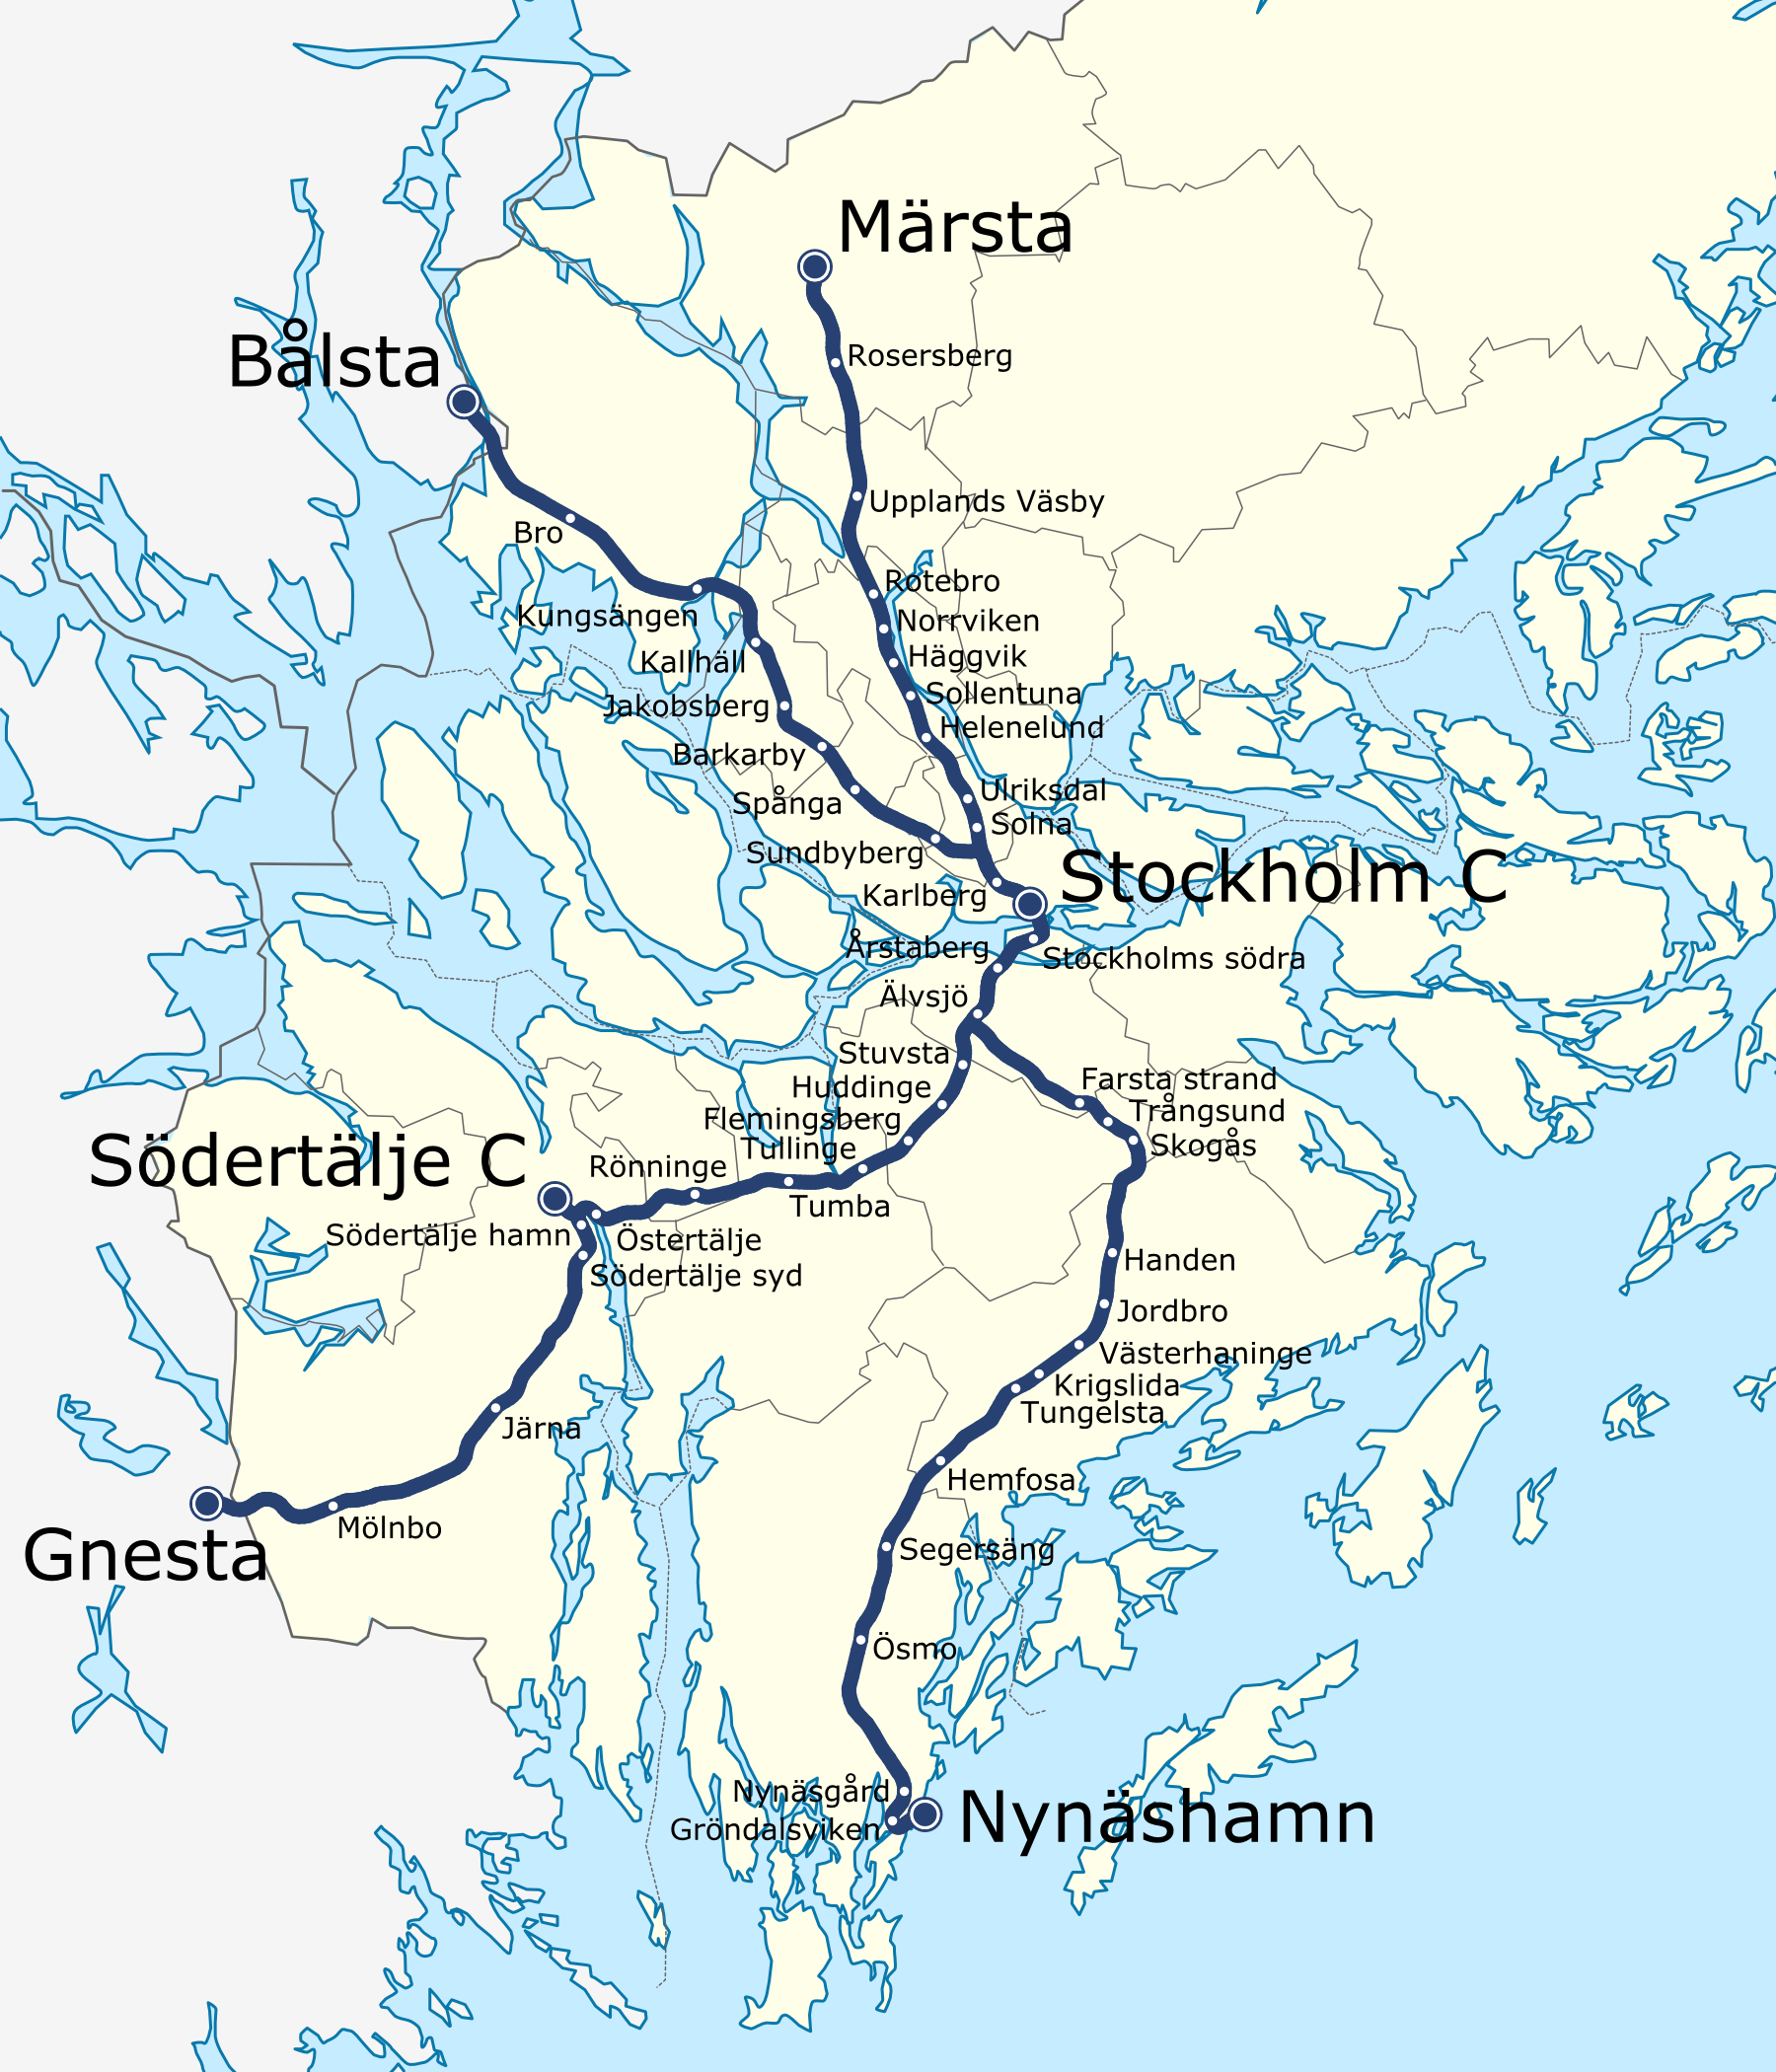 File:Stockholm commuter rail geographic map.png - Wikimedia Commons